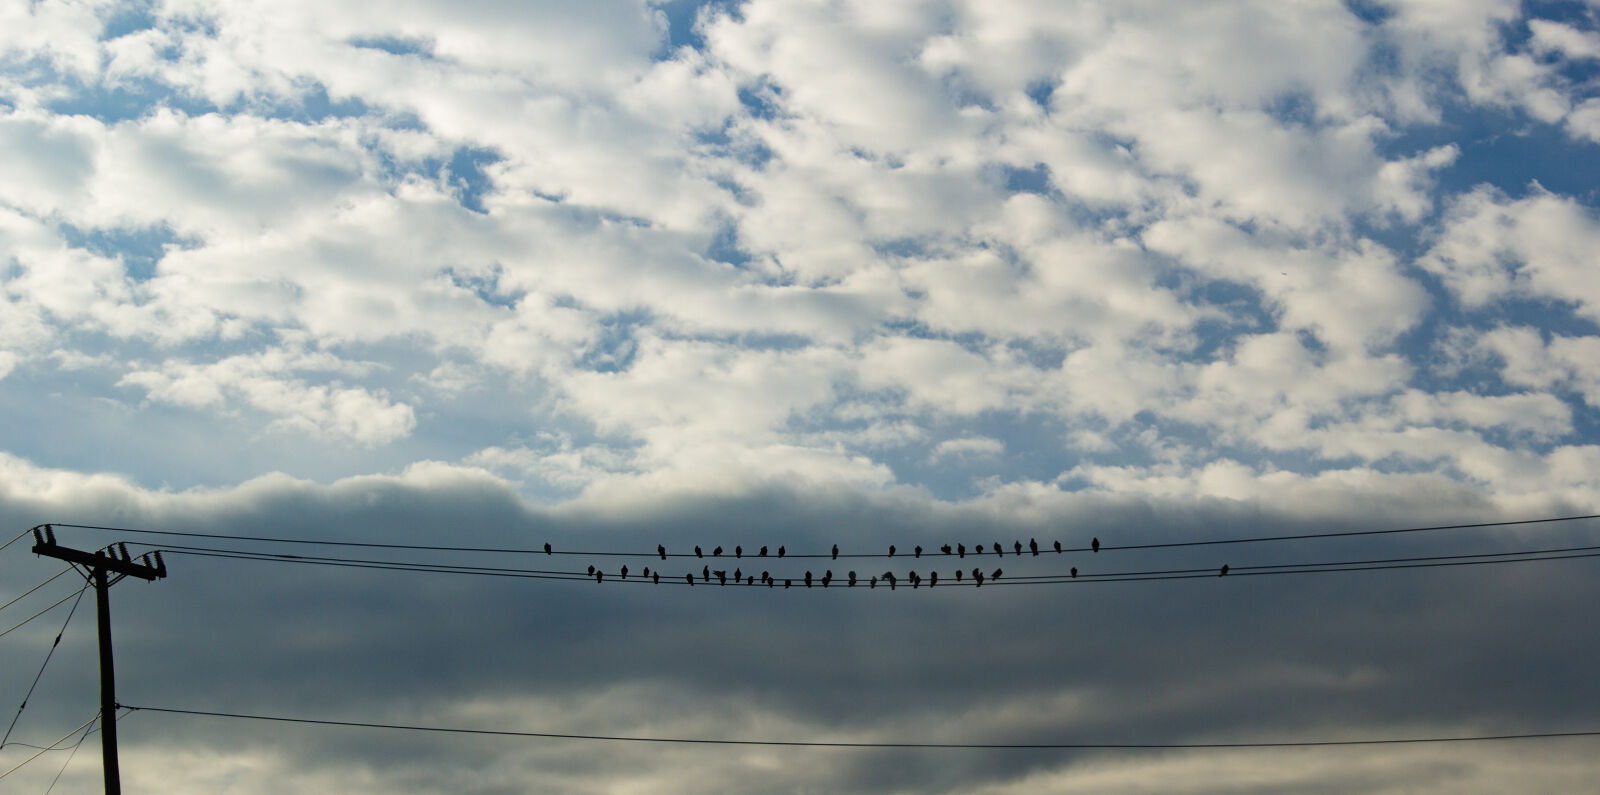 Canon EOS 60D + Sigma 24-105mm f/4 DG OS HSM | A sample photo. Birds, clouds, fall photography